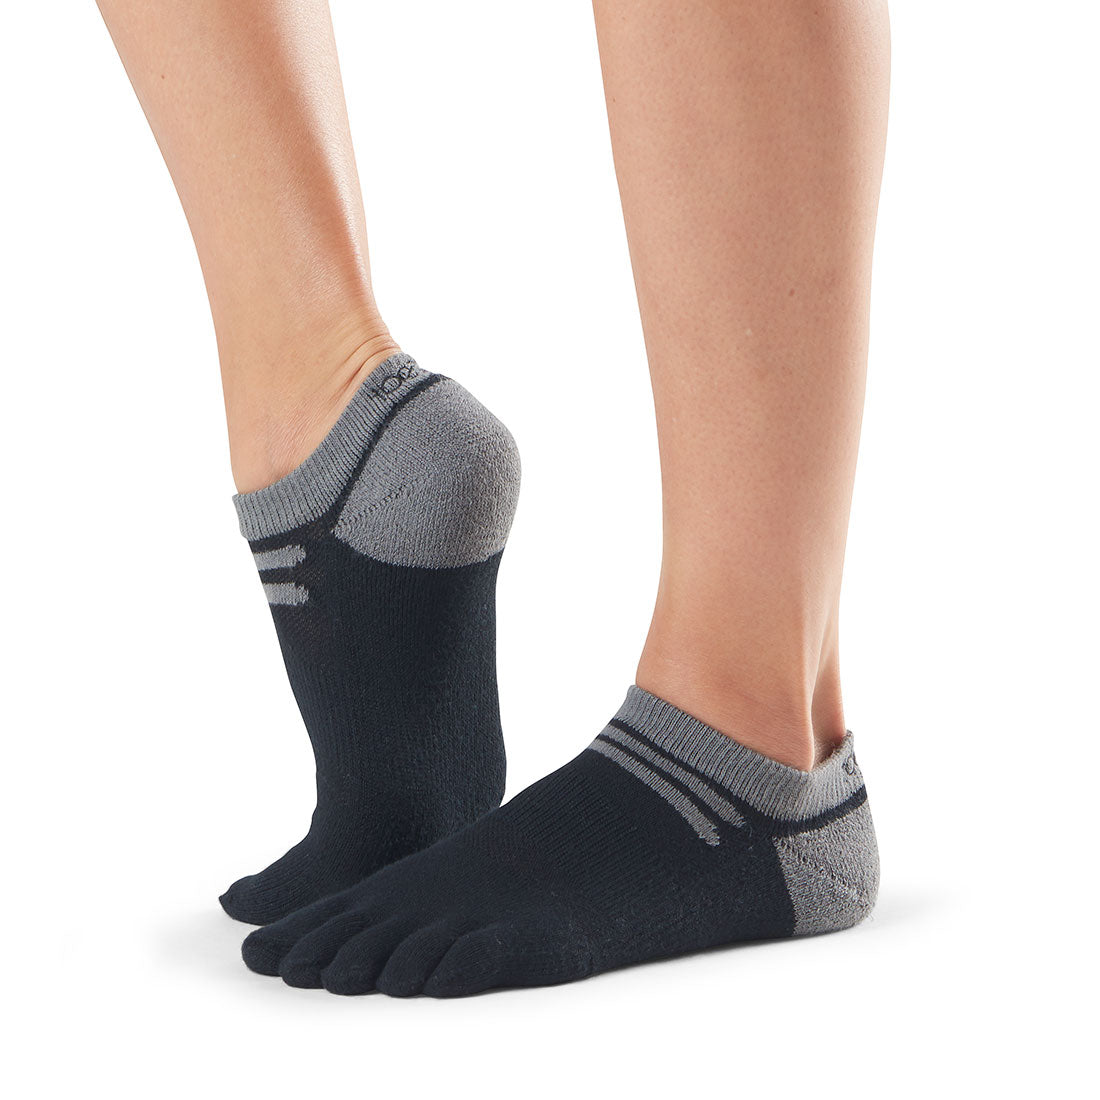 ToeSox - Bellarina Grip Socks - SPRING COLLECTION 2020 - T8 Fitness - Asia  Yoga, Pilates, Rehab, Fitness Products